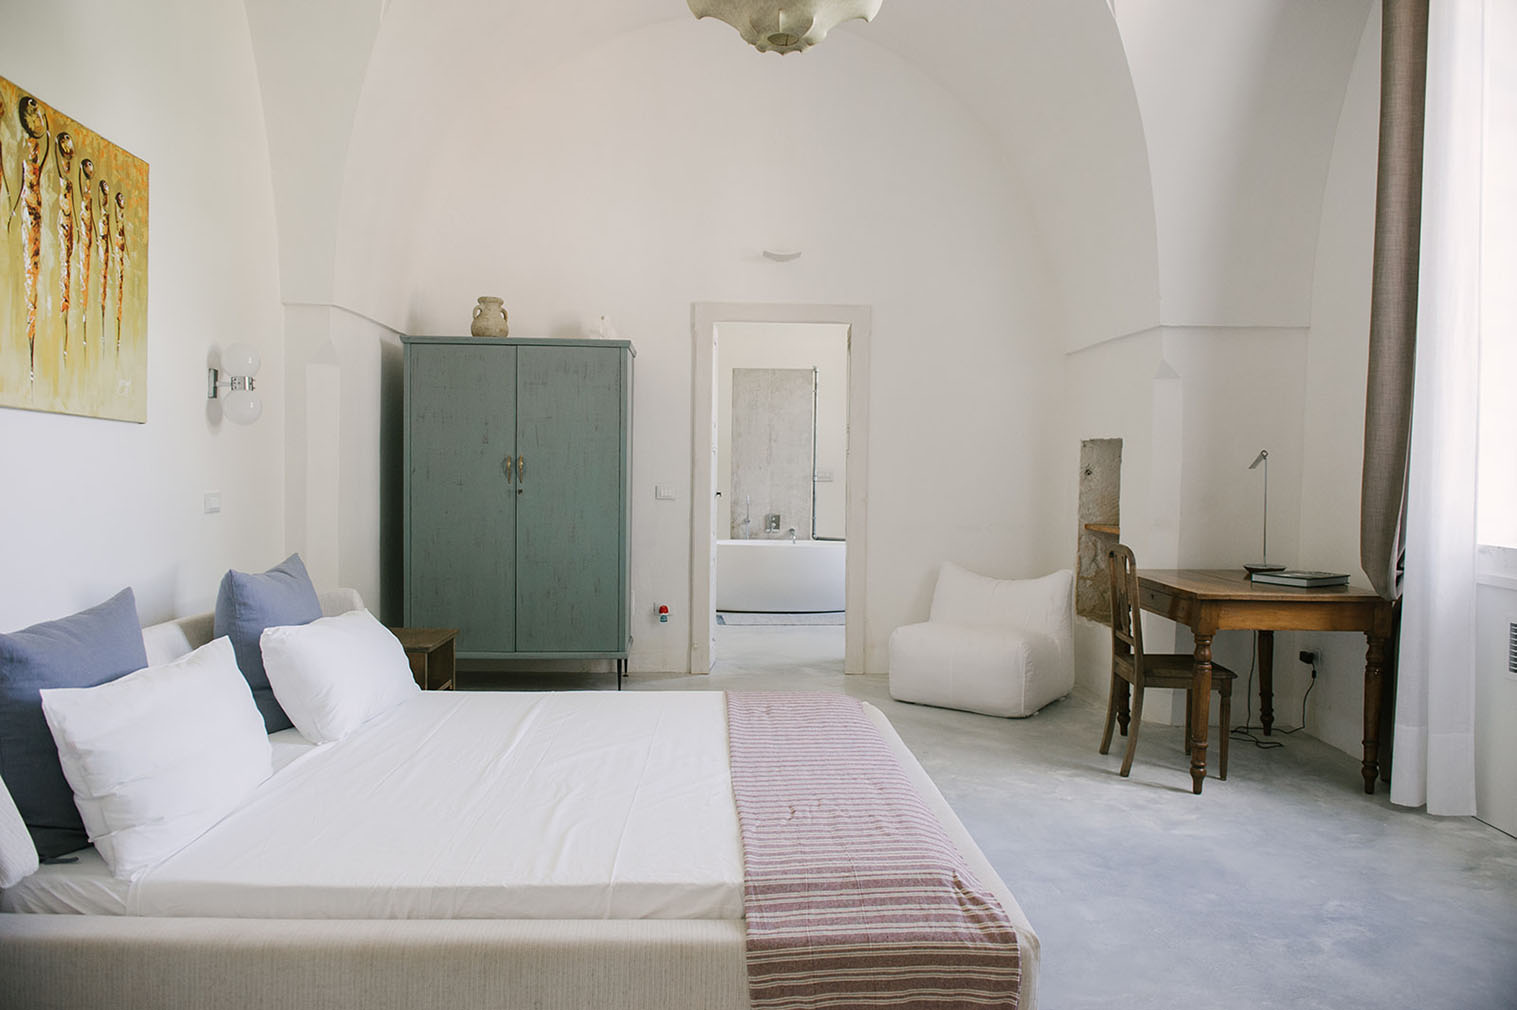 A tobacco warehouse in Italy’s Salento is reborn as a rural holiday retreat